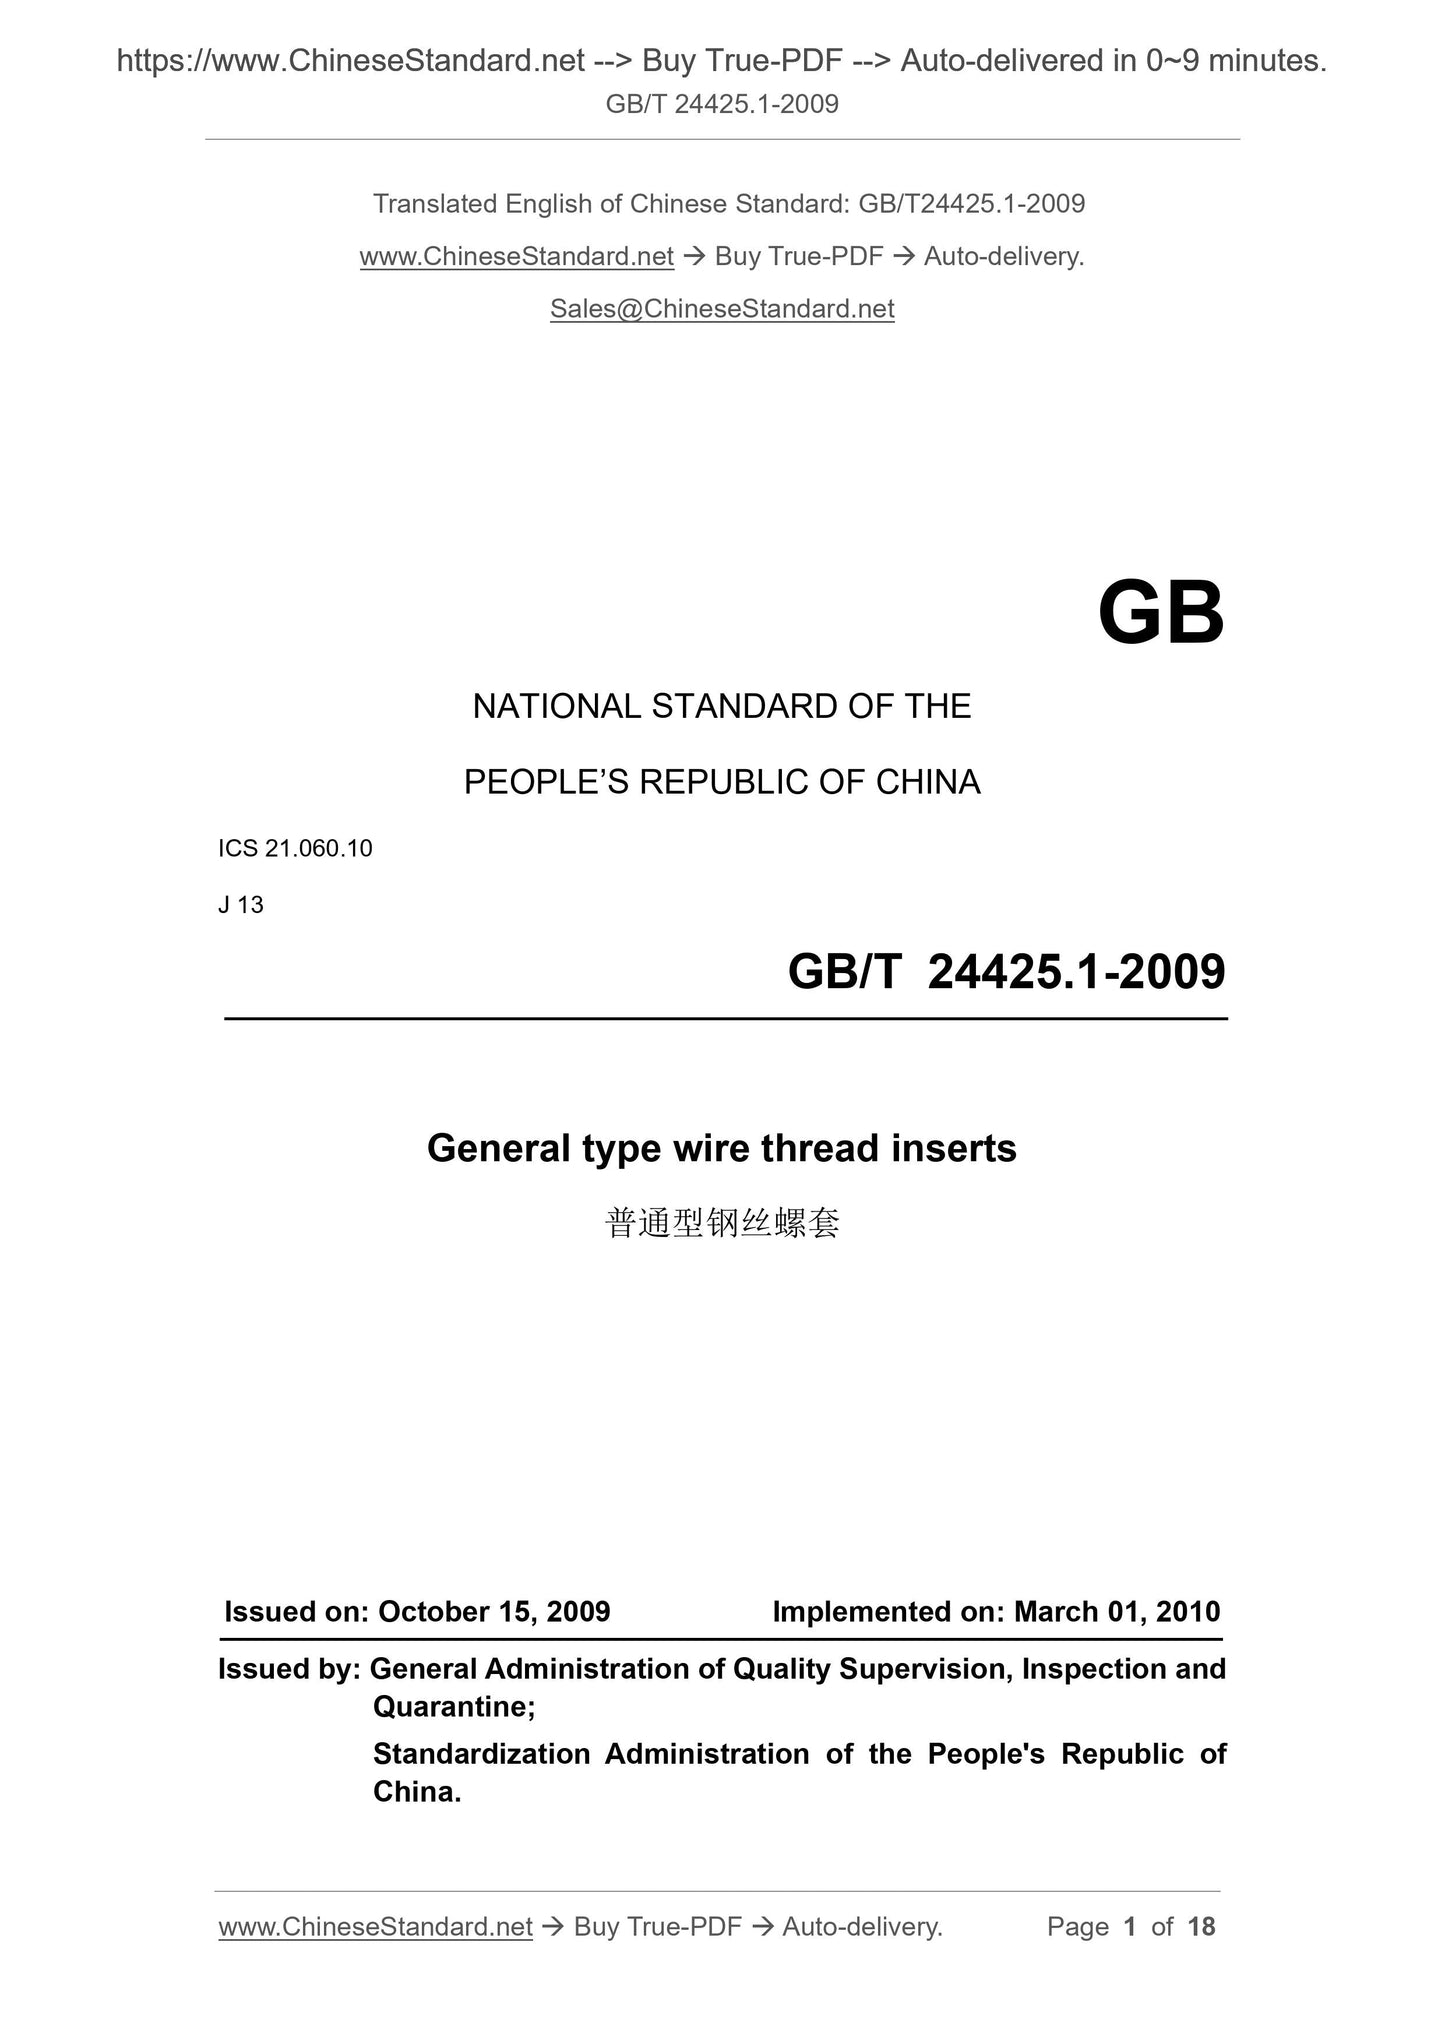 GB/T 24425.1-2009 Page 1